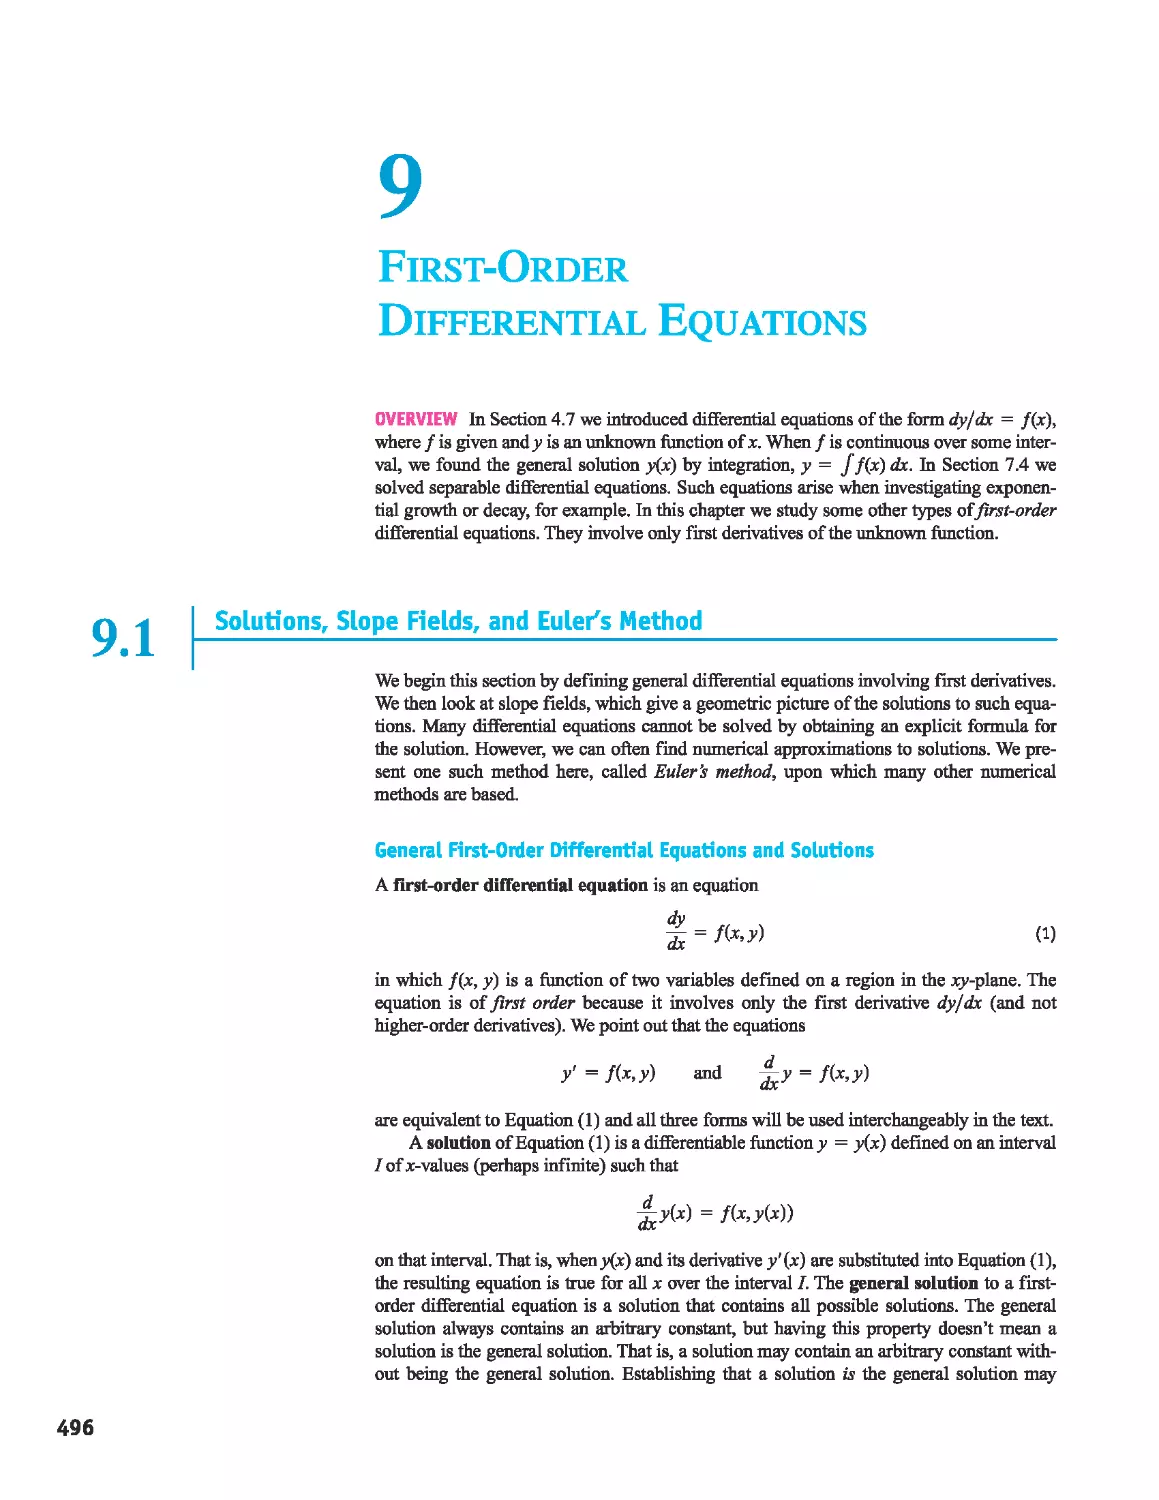 9 - First-Order Differential Equations